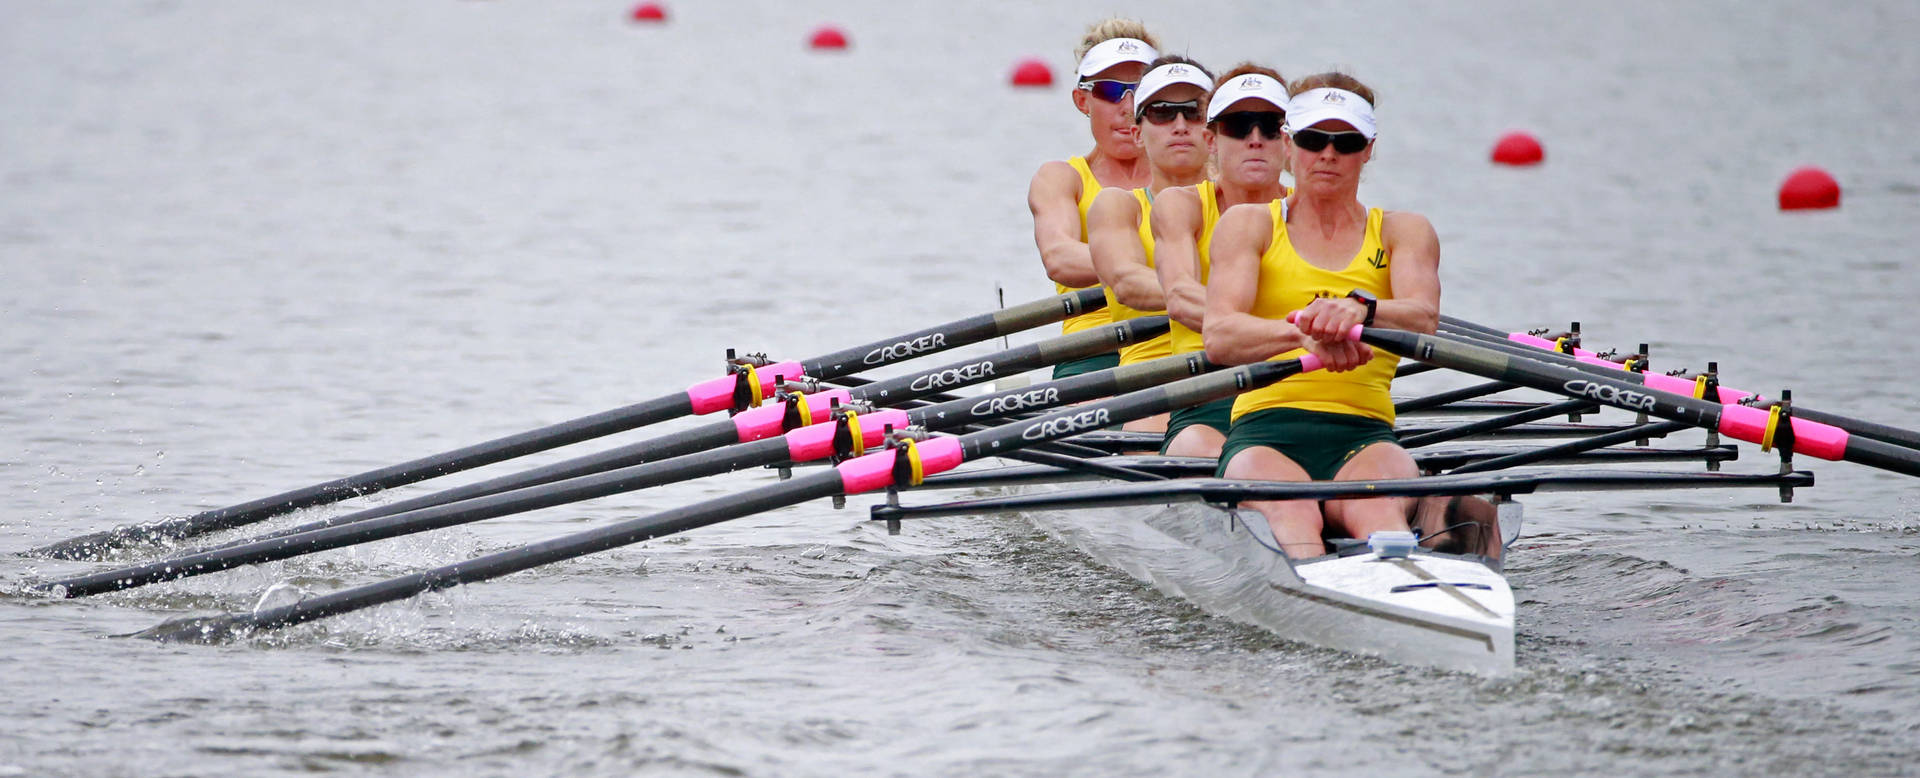 Women's Championship Rowing Team In Action Background